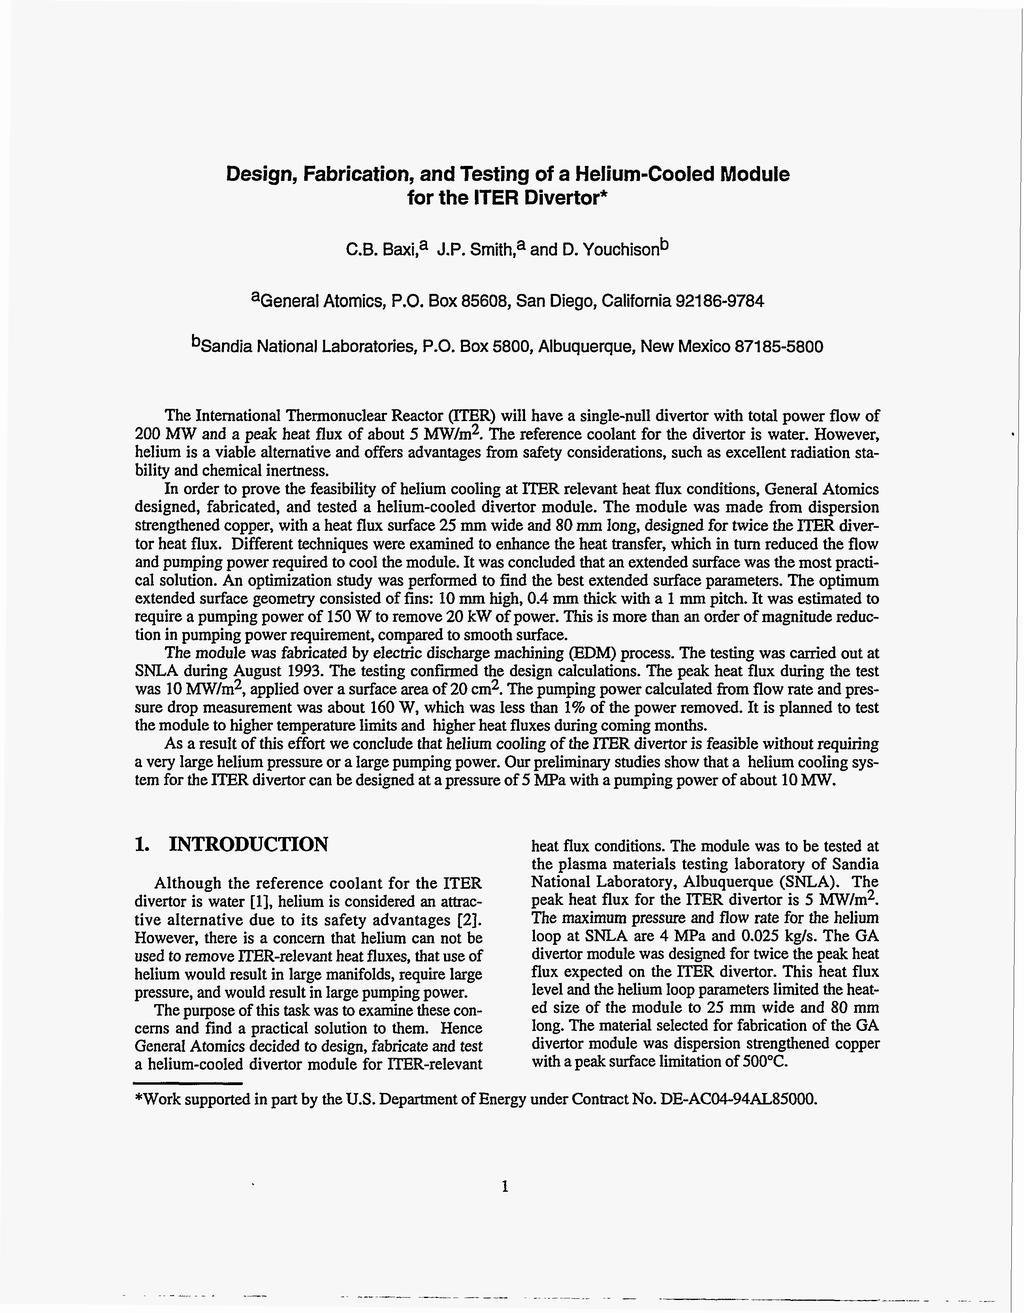 Design, Fabrication, and Testing of a Helium-Cooled Module for the ITER Divertor* C.B. Baxi,a J.P. Smith,a and D. Youchisonb ageneral Atomics, P.O.